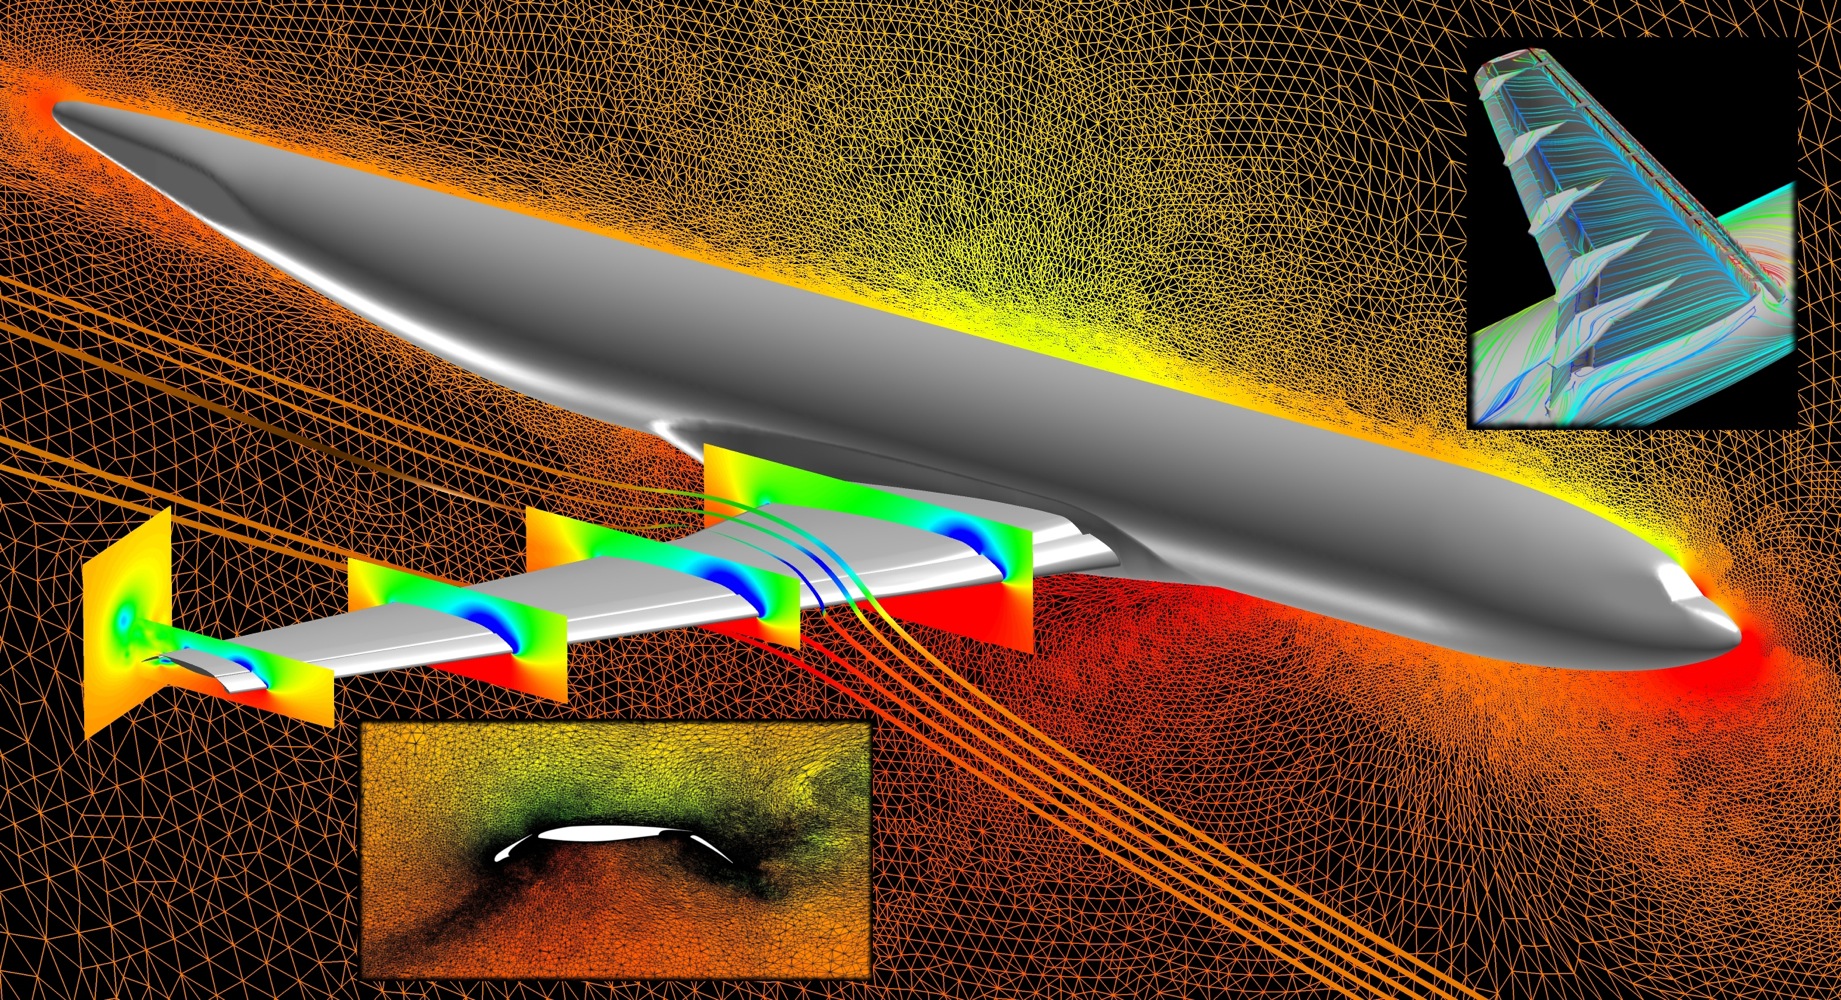 CFD visualization of an aircraft in a high-lift configuration.